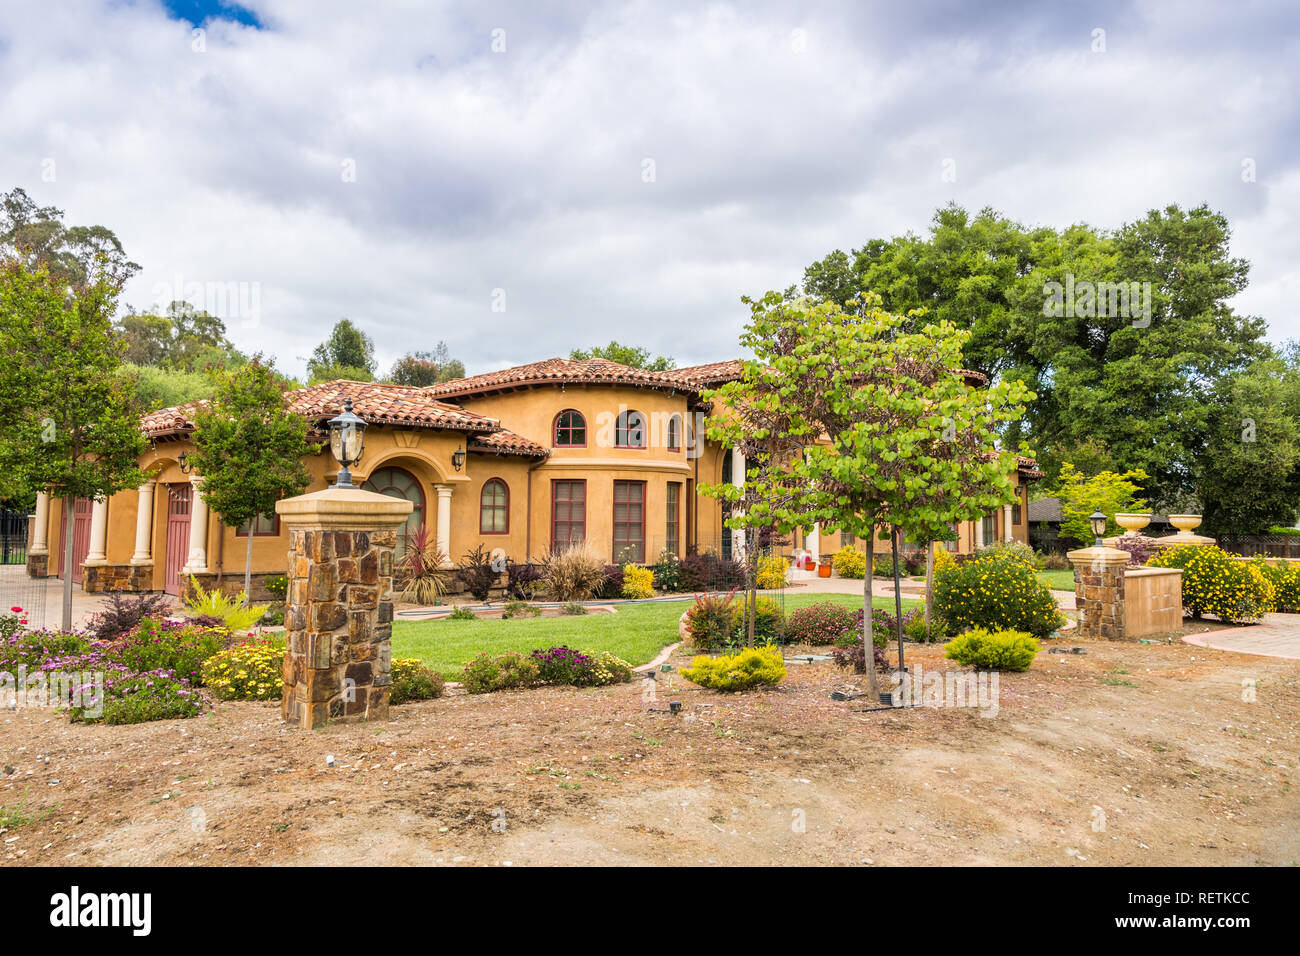 Exterior view of a large house located on the hills of Saratoga, south San Francisco bay area, California Stock Photo